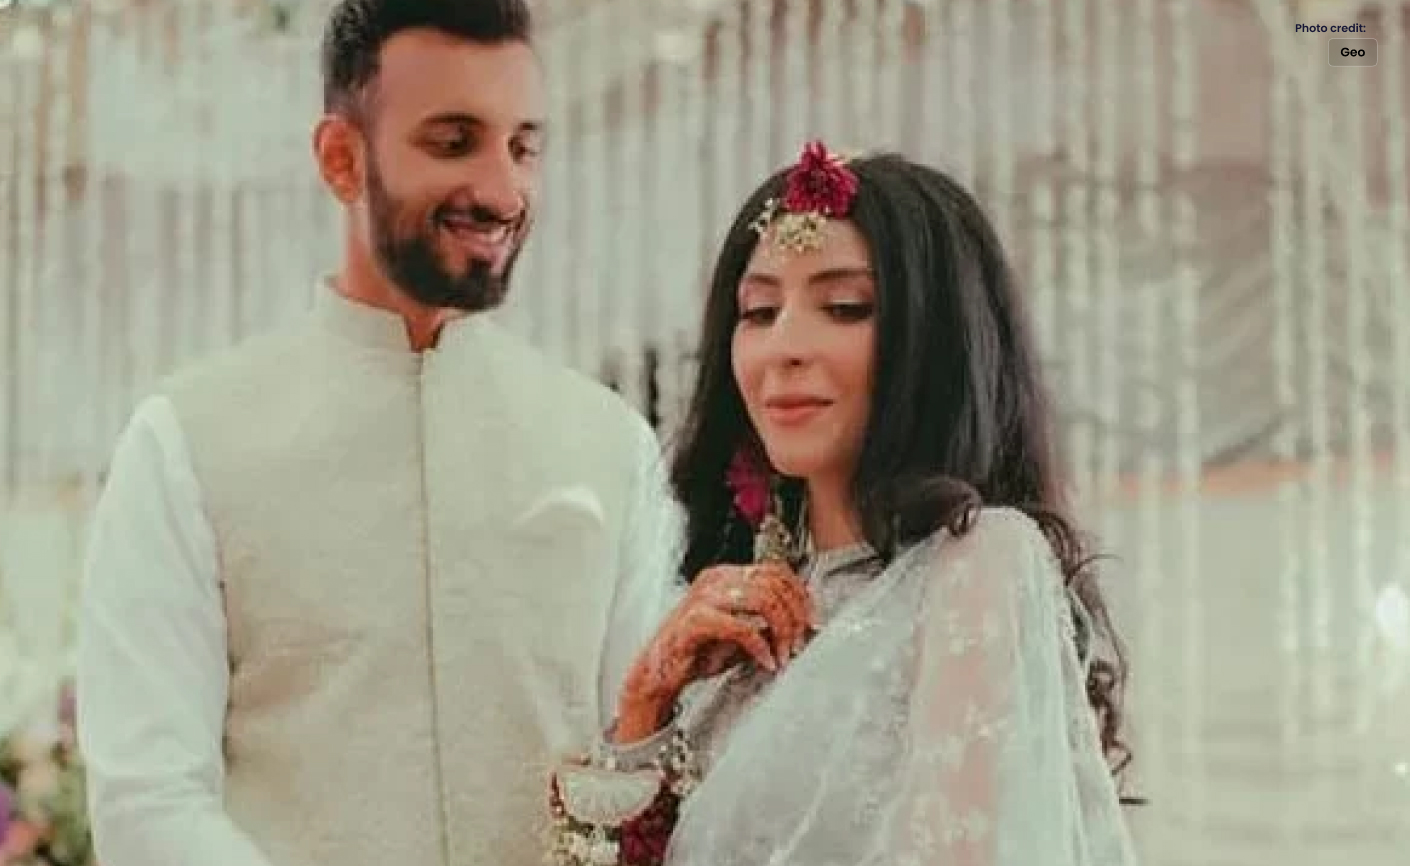 Shan Masood ties the knot with Nische Khan in Peshawar